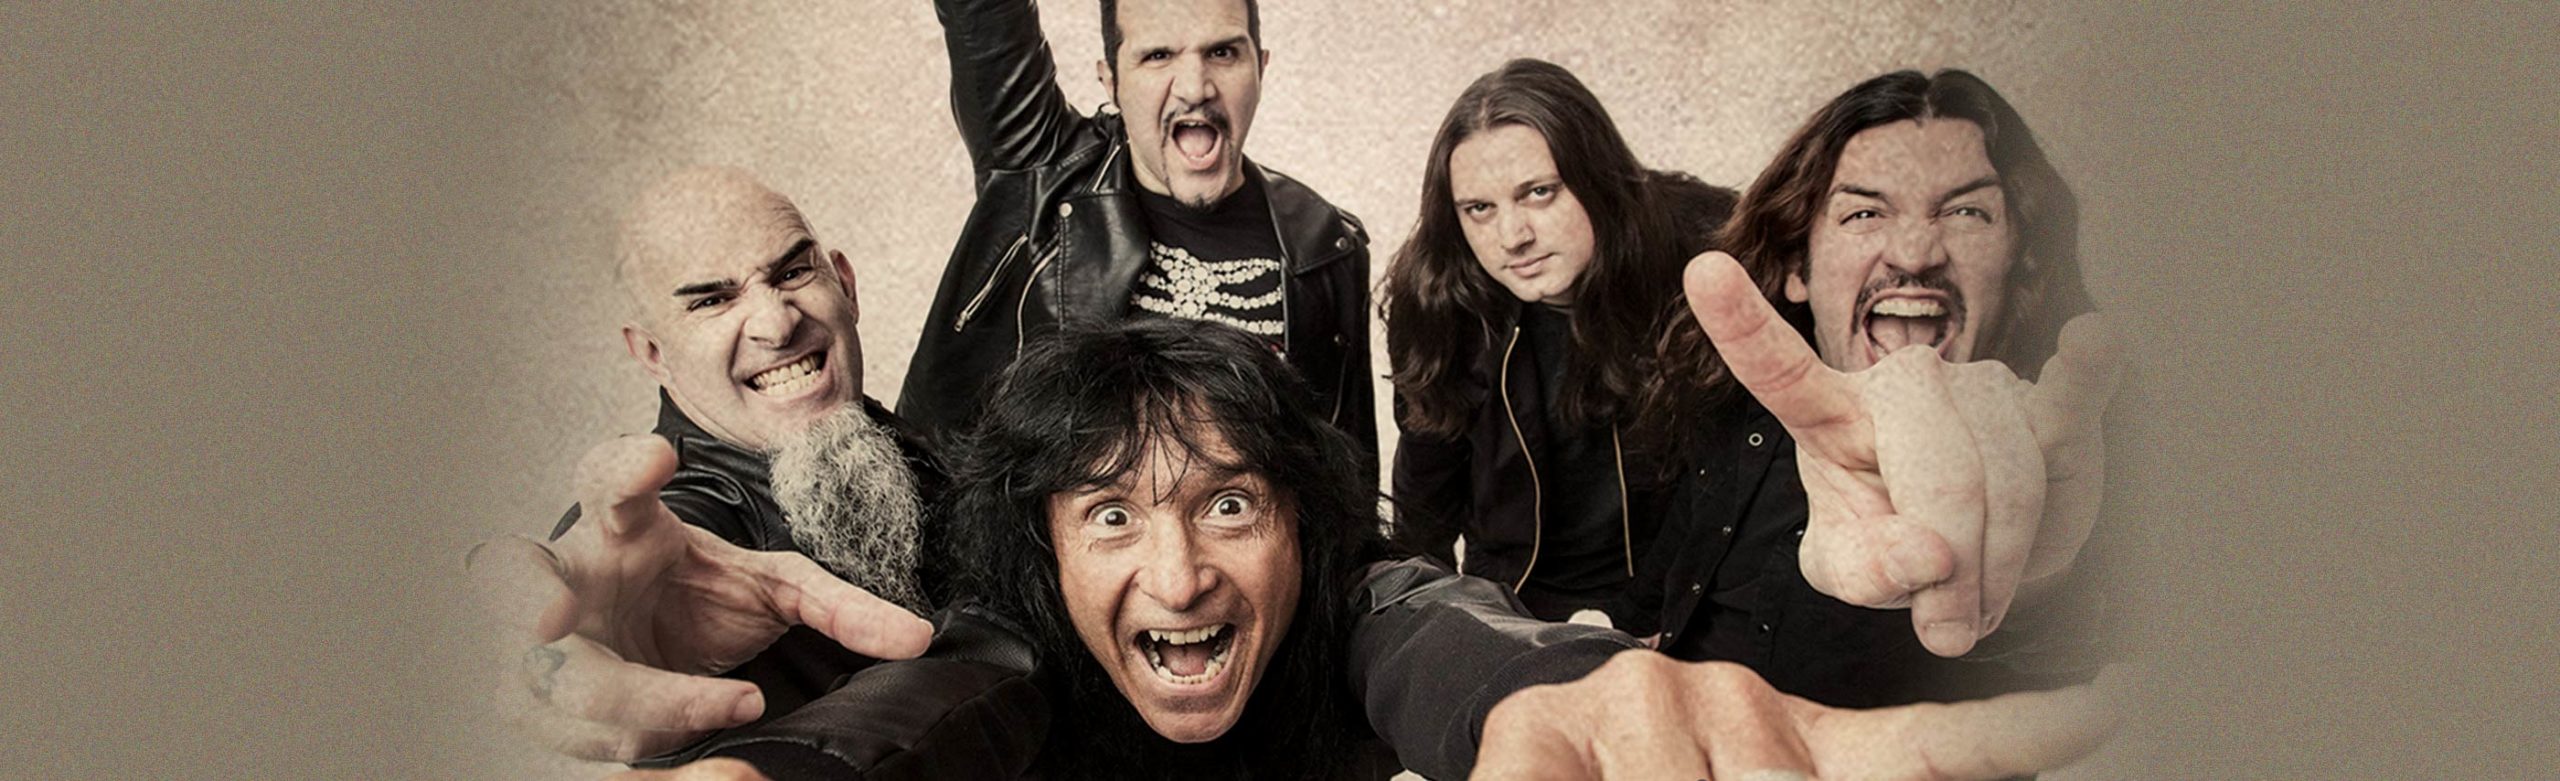 JUST ANNOUNCED: Anthrax and Testament to Headline Concert in Missoula Image